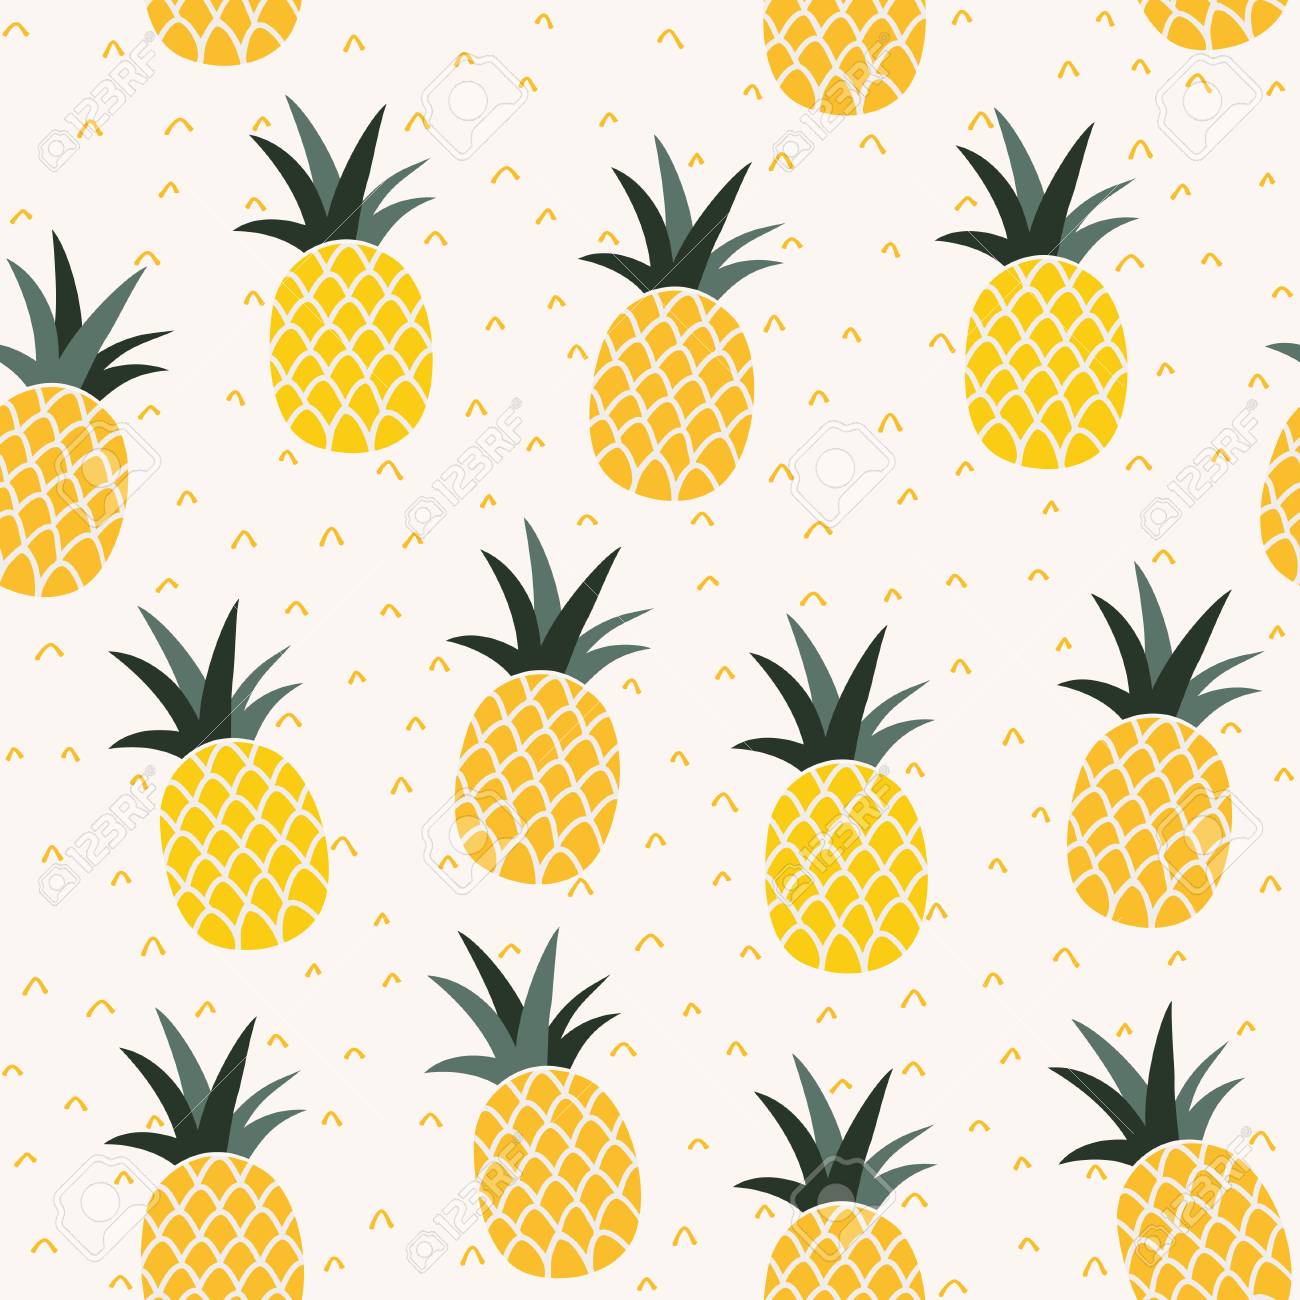 Seamless Pineapple Pattern Cute Doodle For